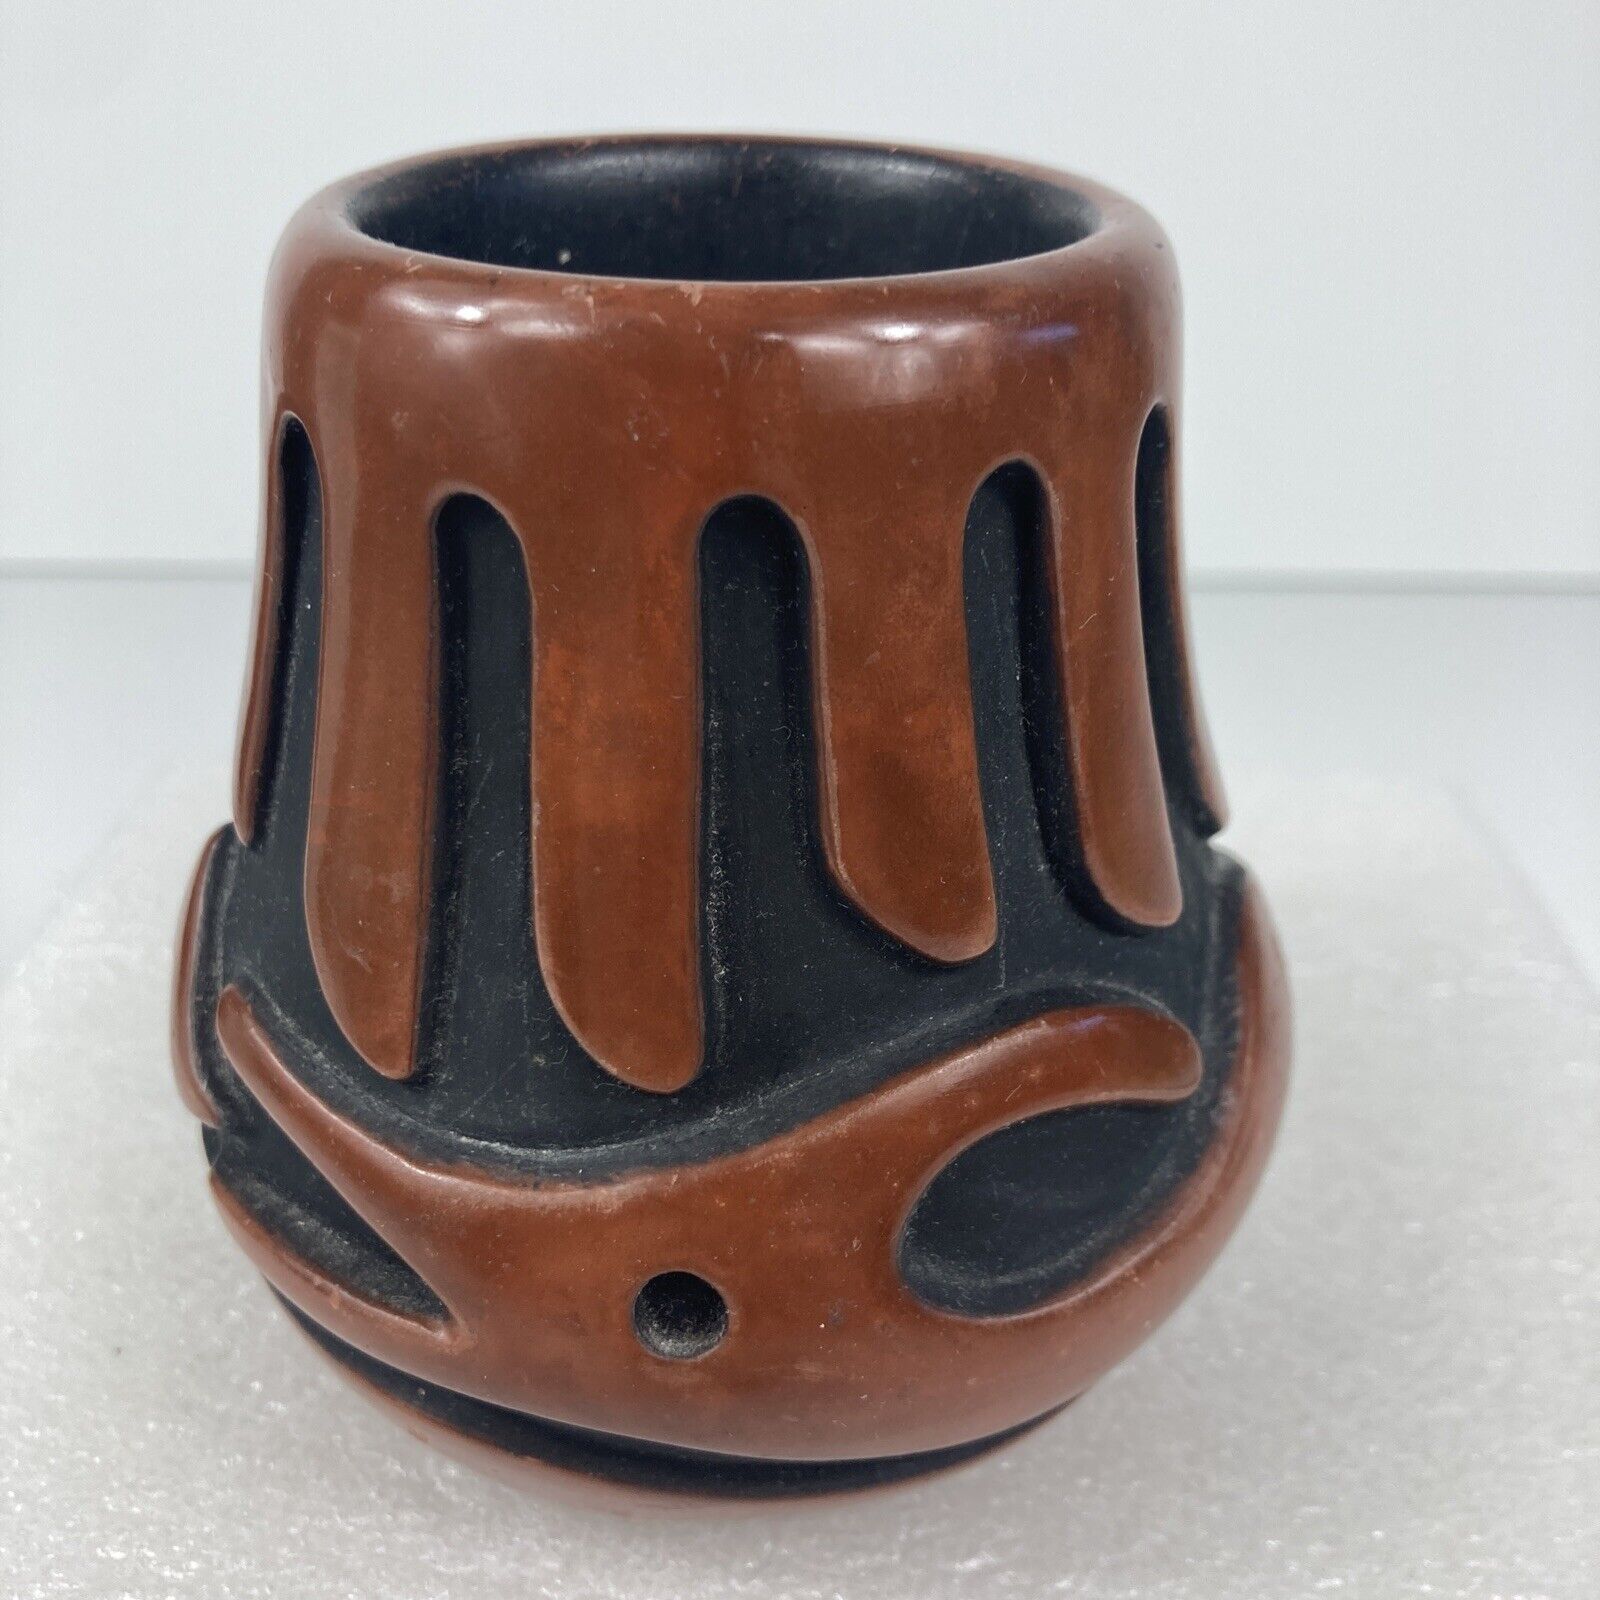 Carol Grace Loretto Carved Redware Pottery Cup Jar Vase B5 Avanyu Water Serpent